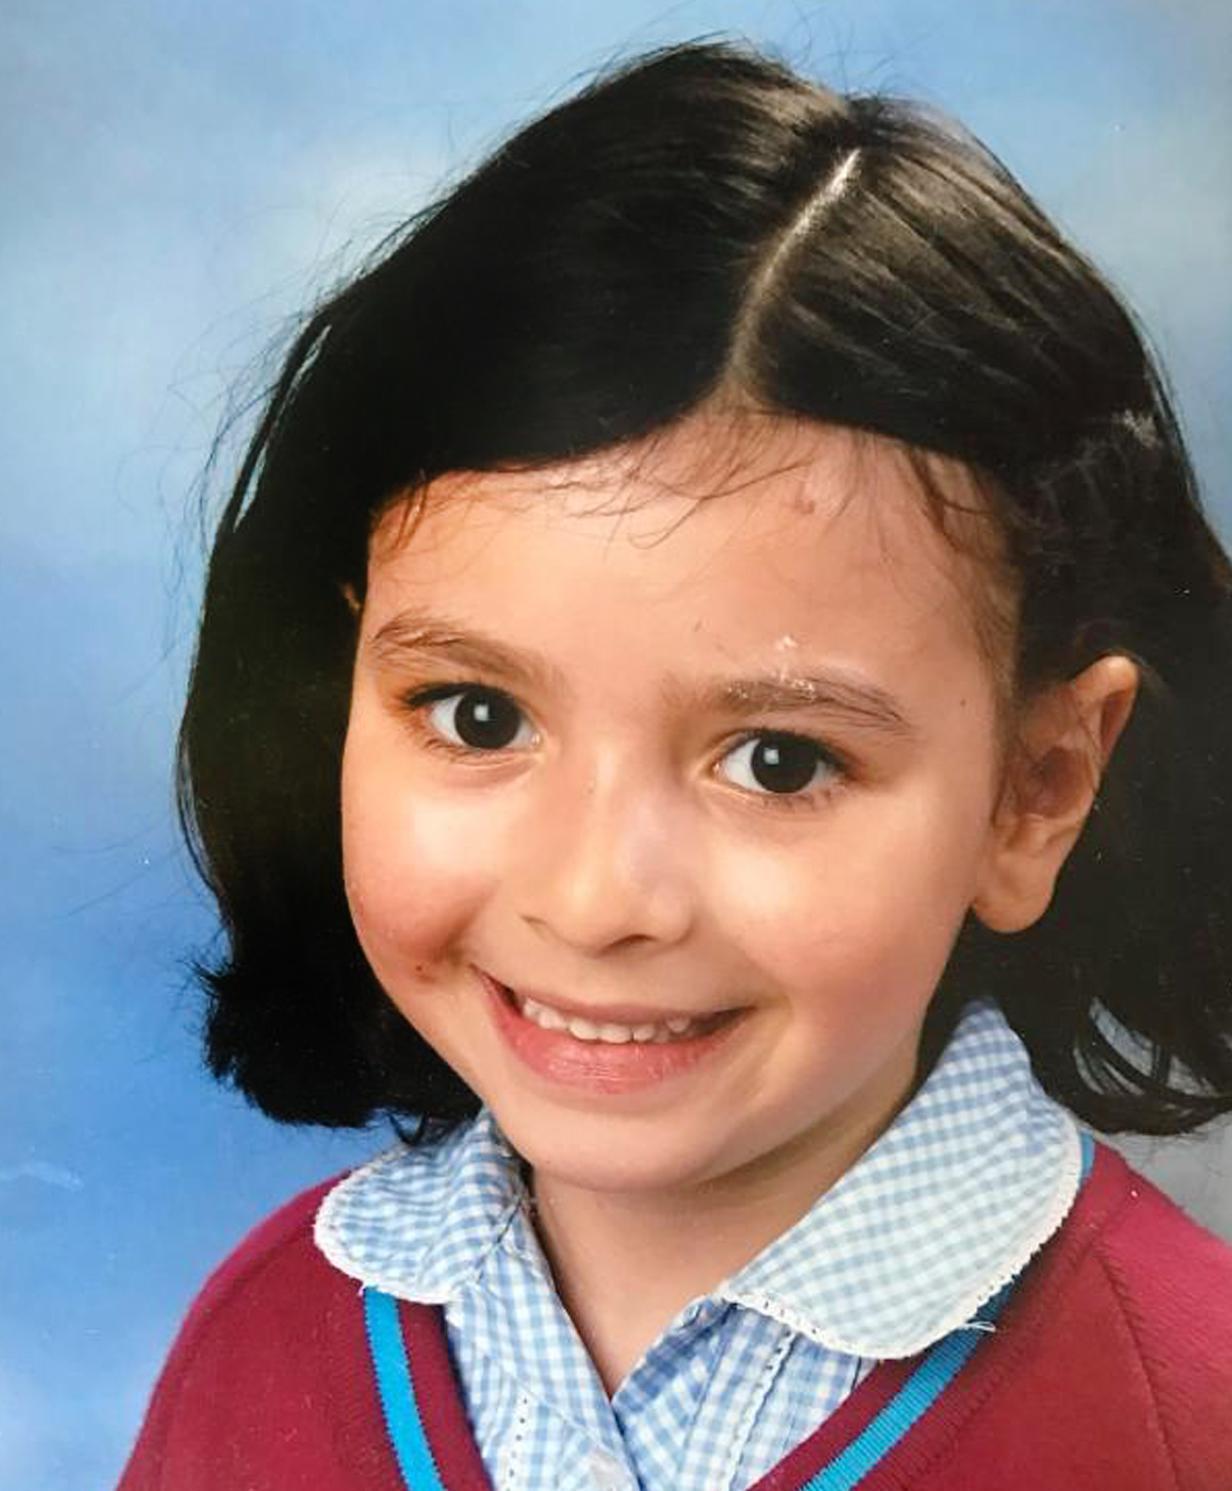 Tamzin Belkadi is believed to be the only member of the family to survive the fire